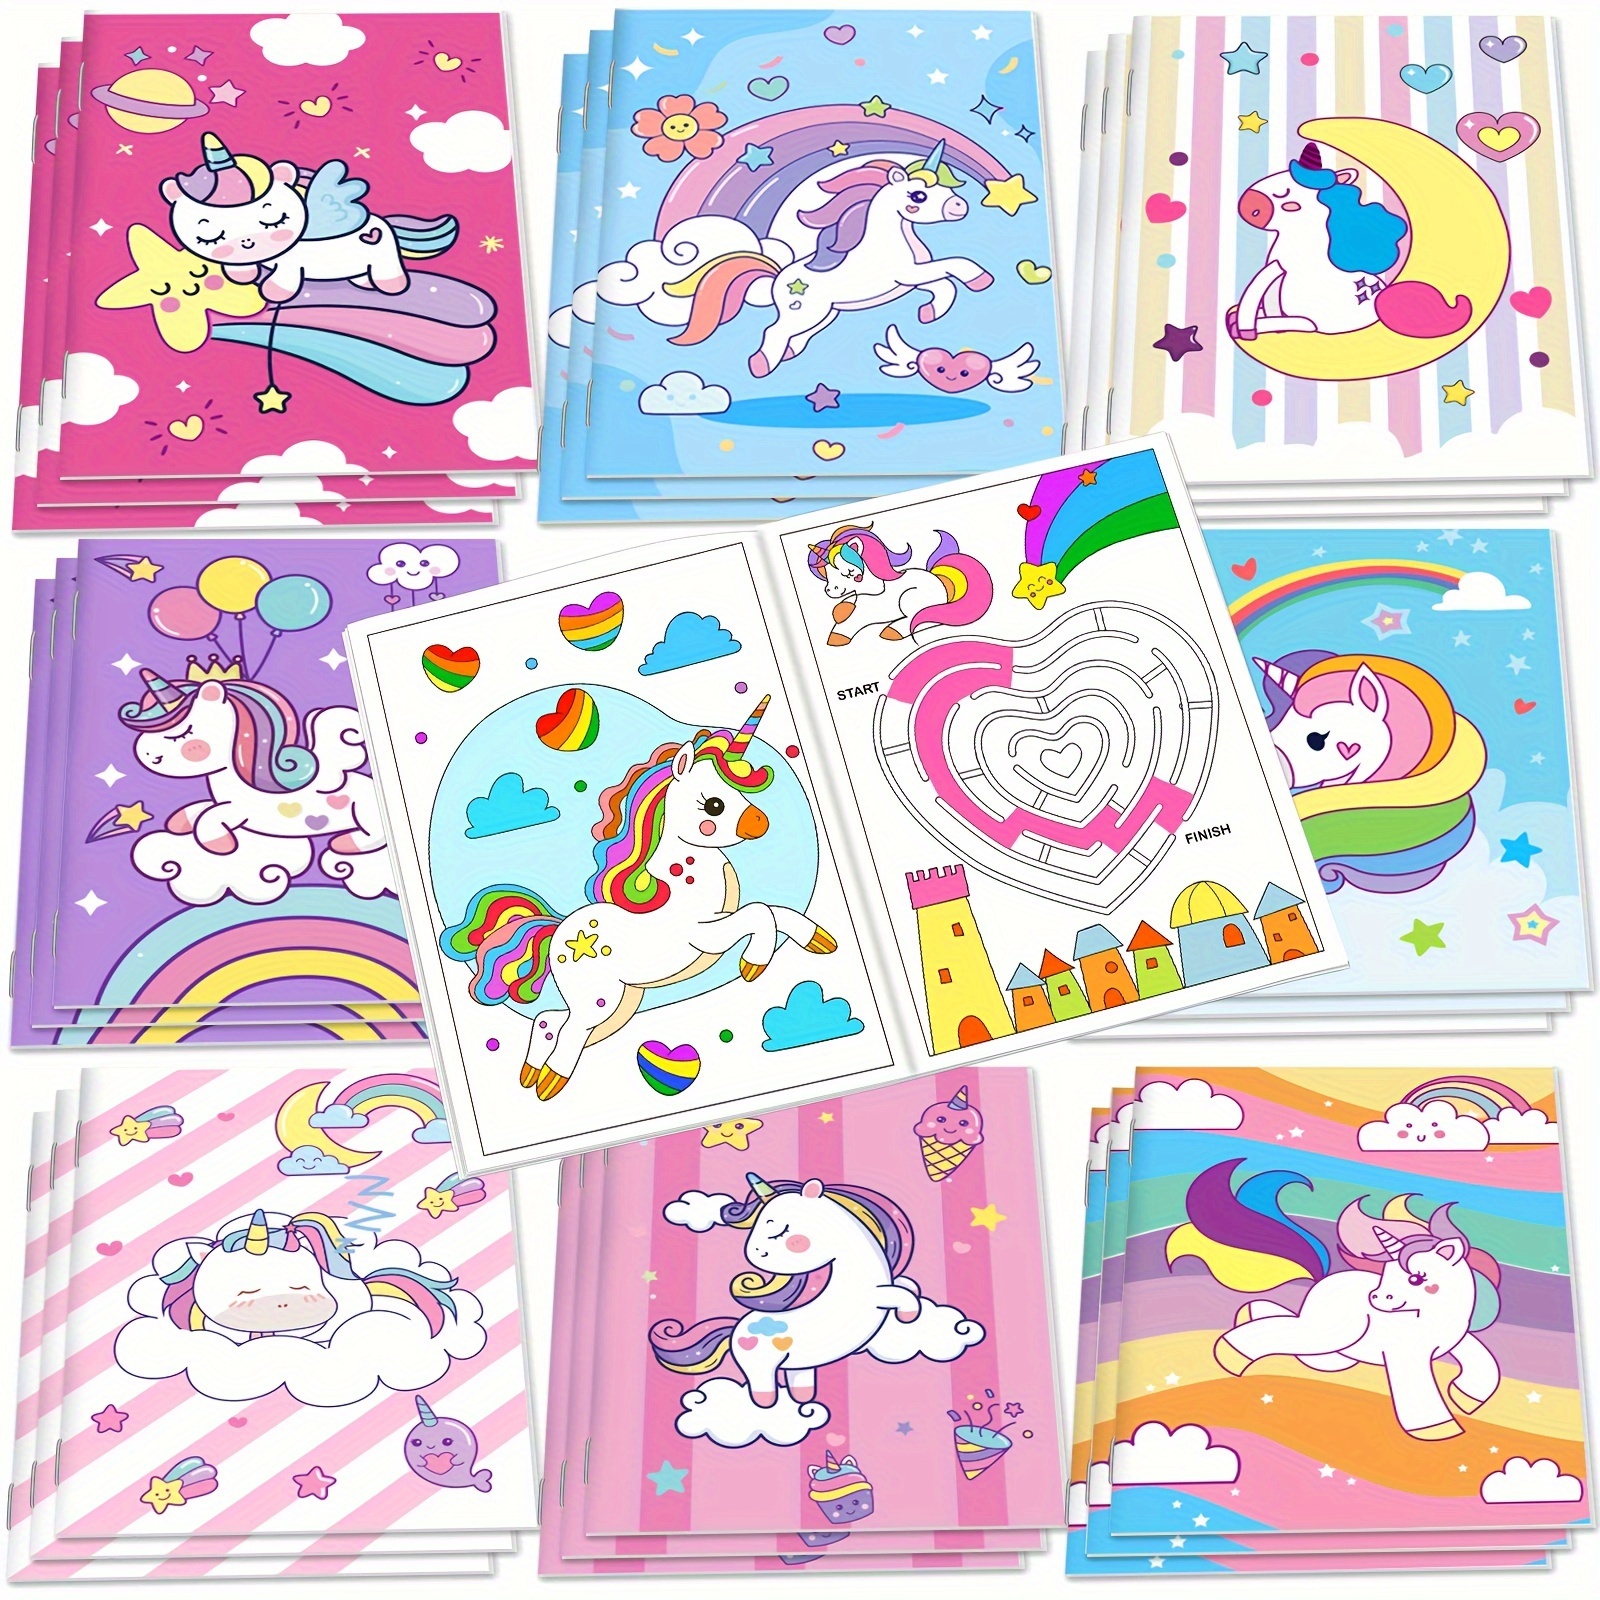 

24pcs Magic Horse Mini Coloring Books For Kids Party Favors Bulk Gift Small Art Unicorm Drawing Activity Book For Birthday Goodie Bags Stuffer Filler Holiday Kindergarten School Classroom Supplies